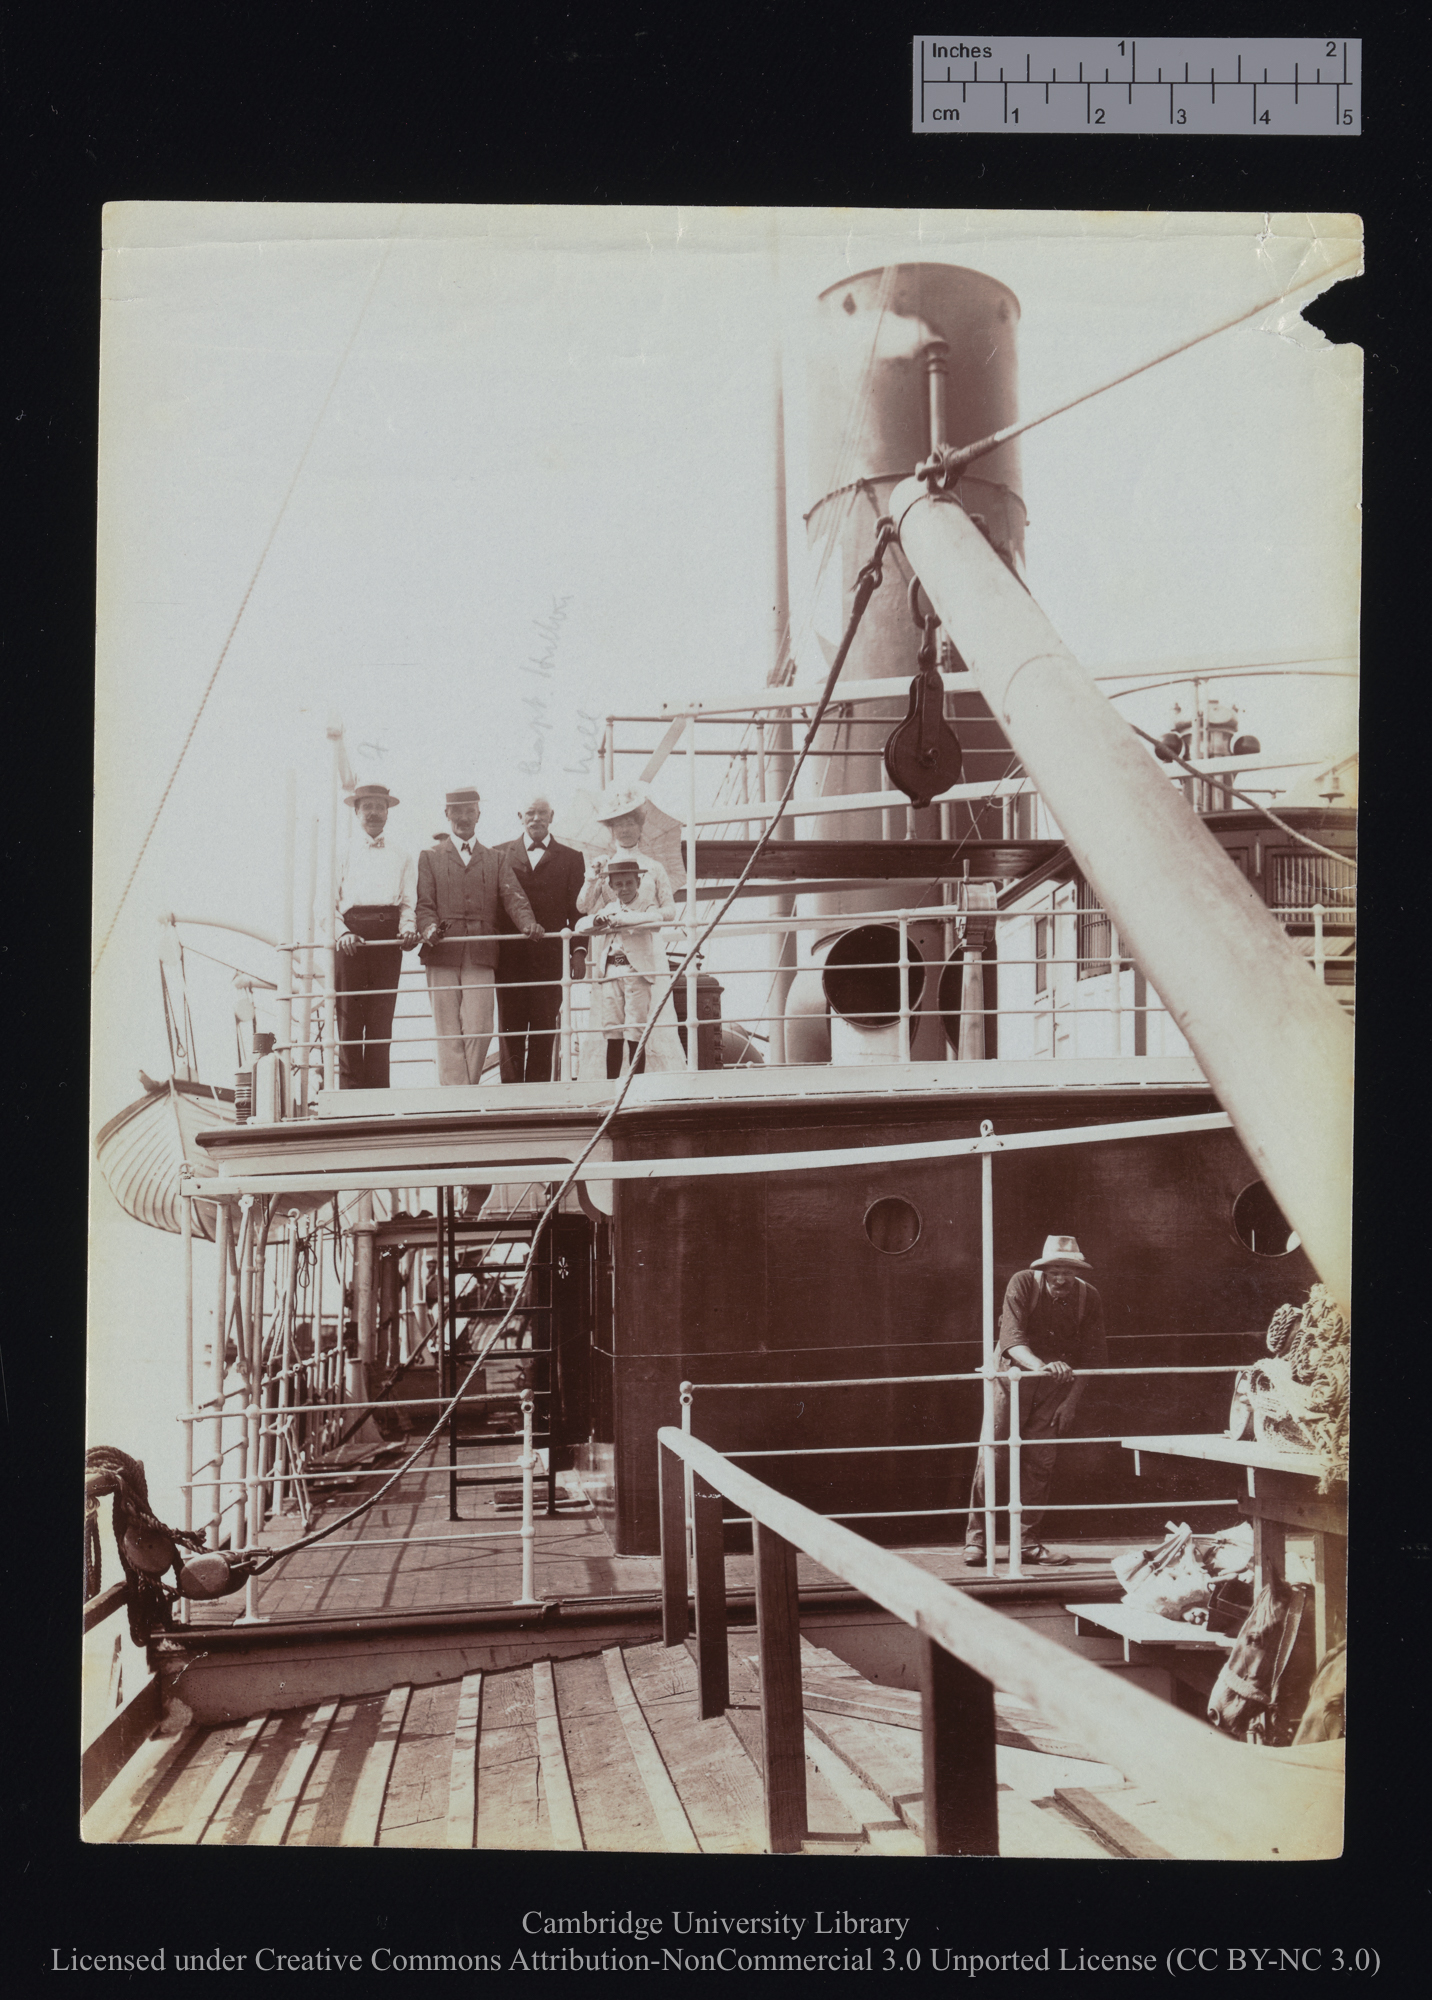 [Group of people on the upper deck of a ship, with a funnel apparently marked with the Houlder symbol], 1899 - 1901